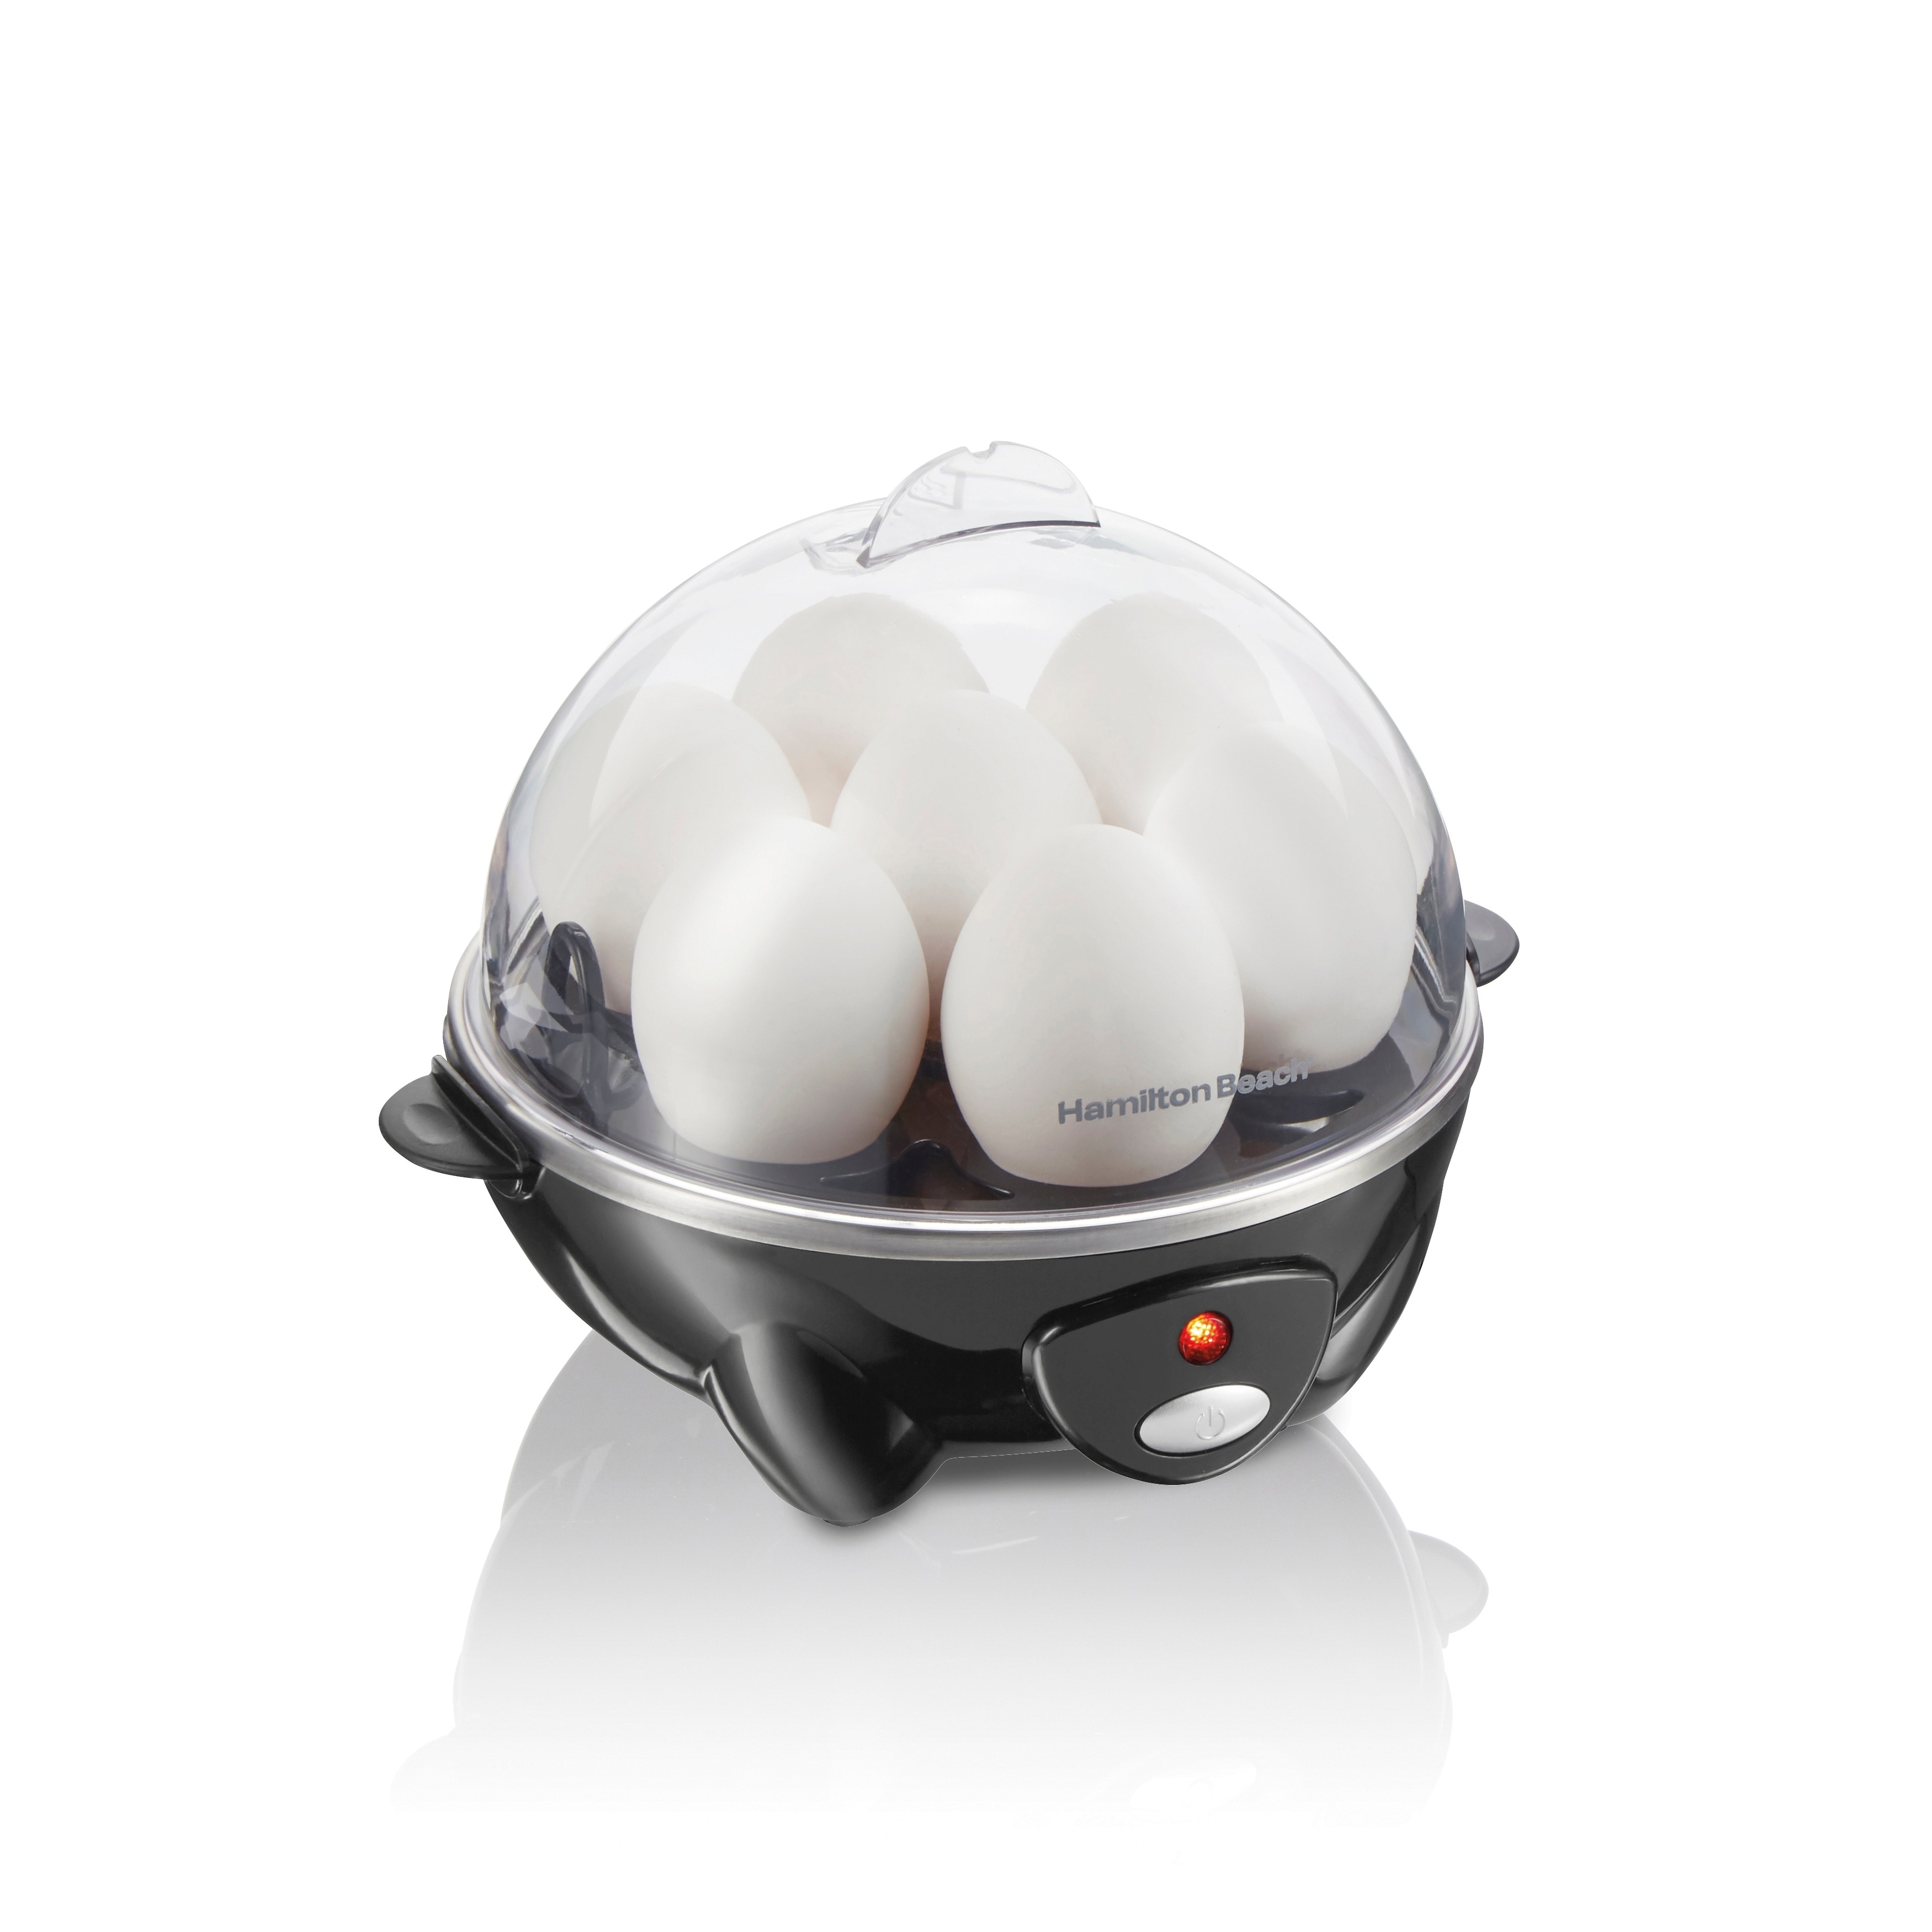 Electric Egg Cooker 7-Capacity BPA-Free Hard-Boiled Egg Maker with